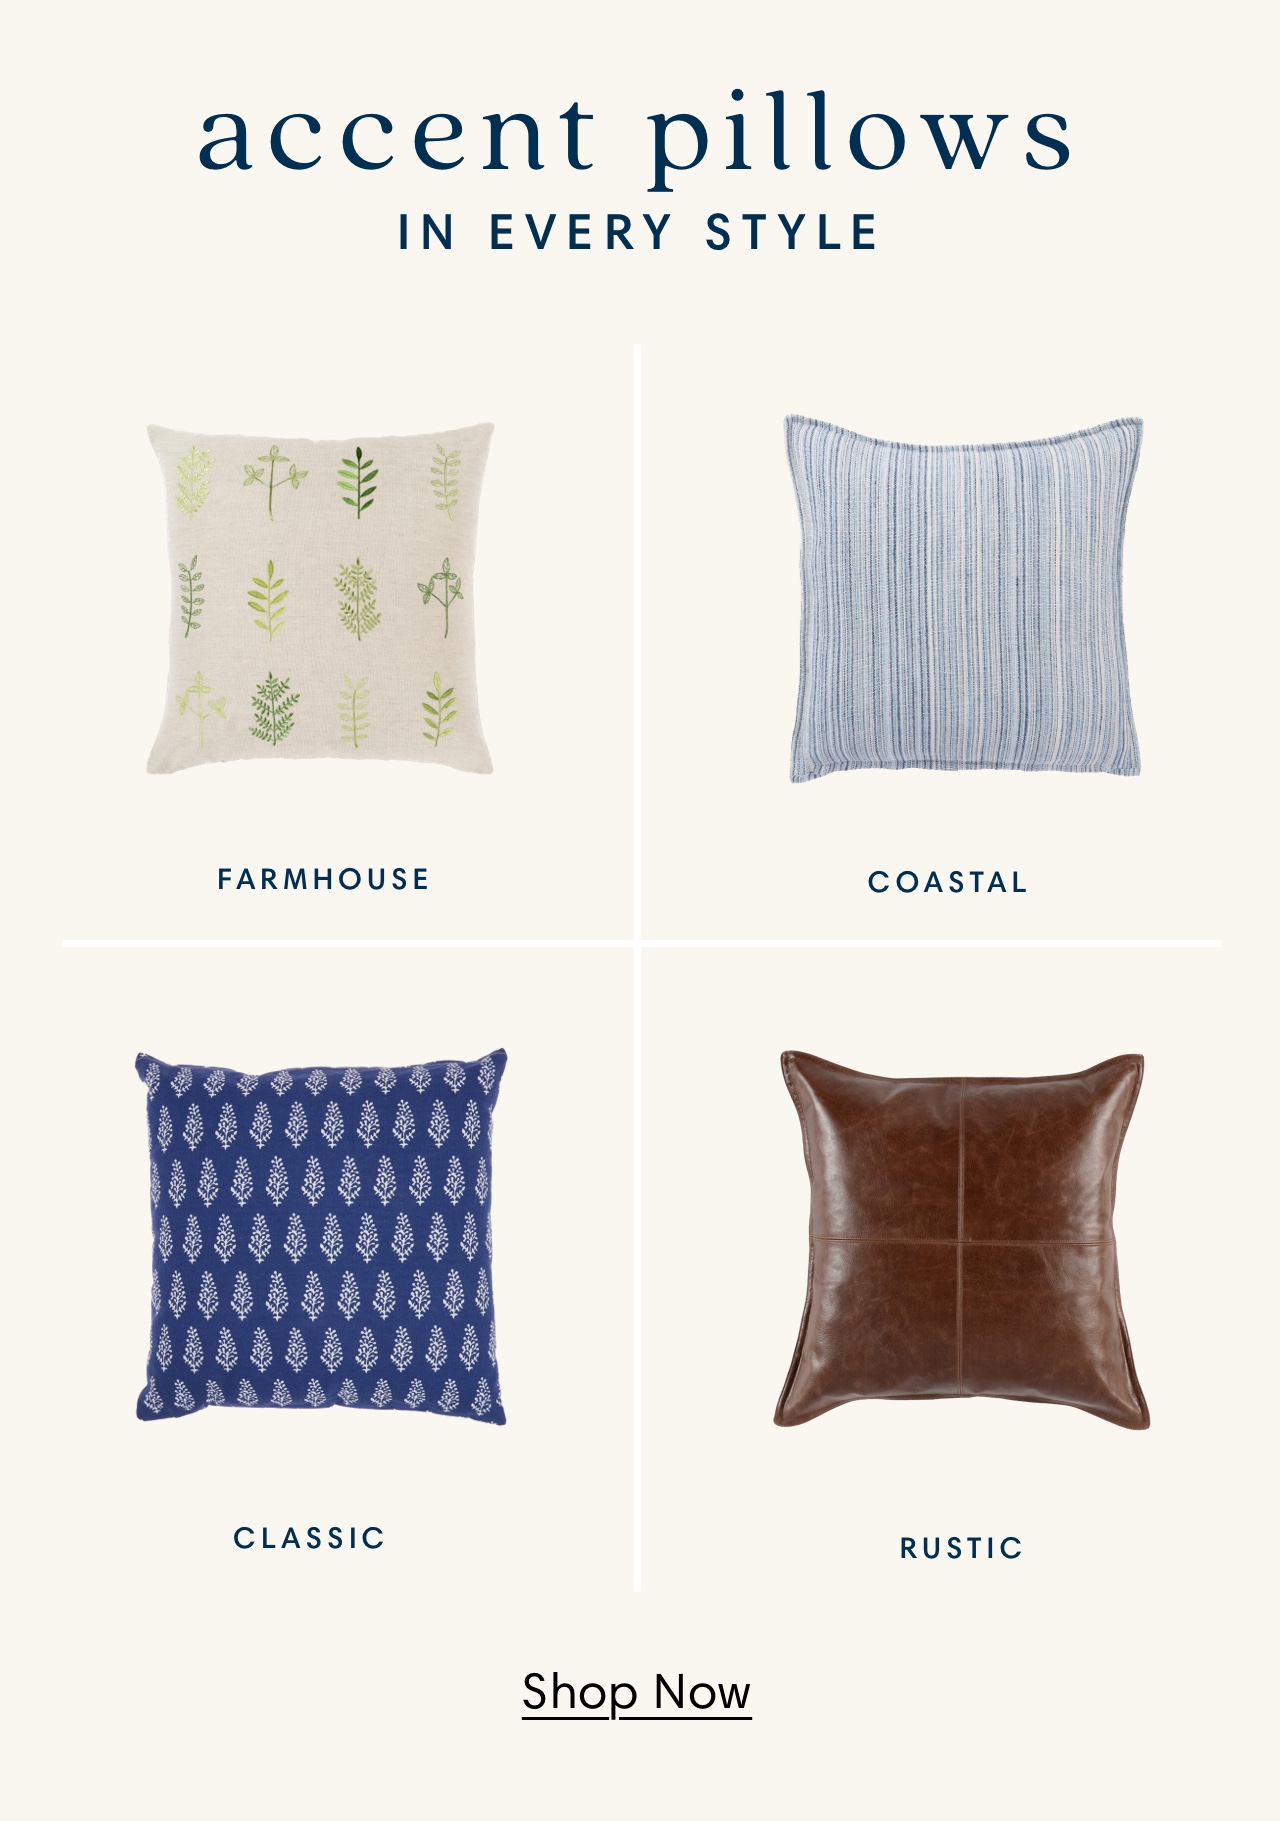 accent pillows IN EVERY STYLE et e HE g FARMHOUSE COASTAL CLASSIC RUSTIC Shop Now 